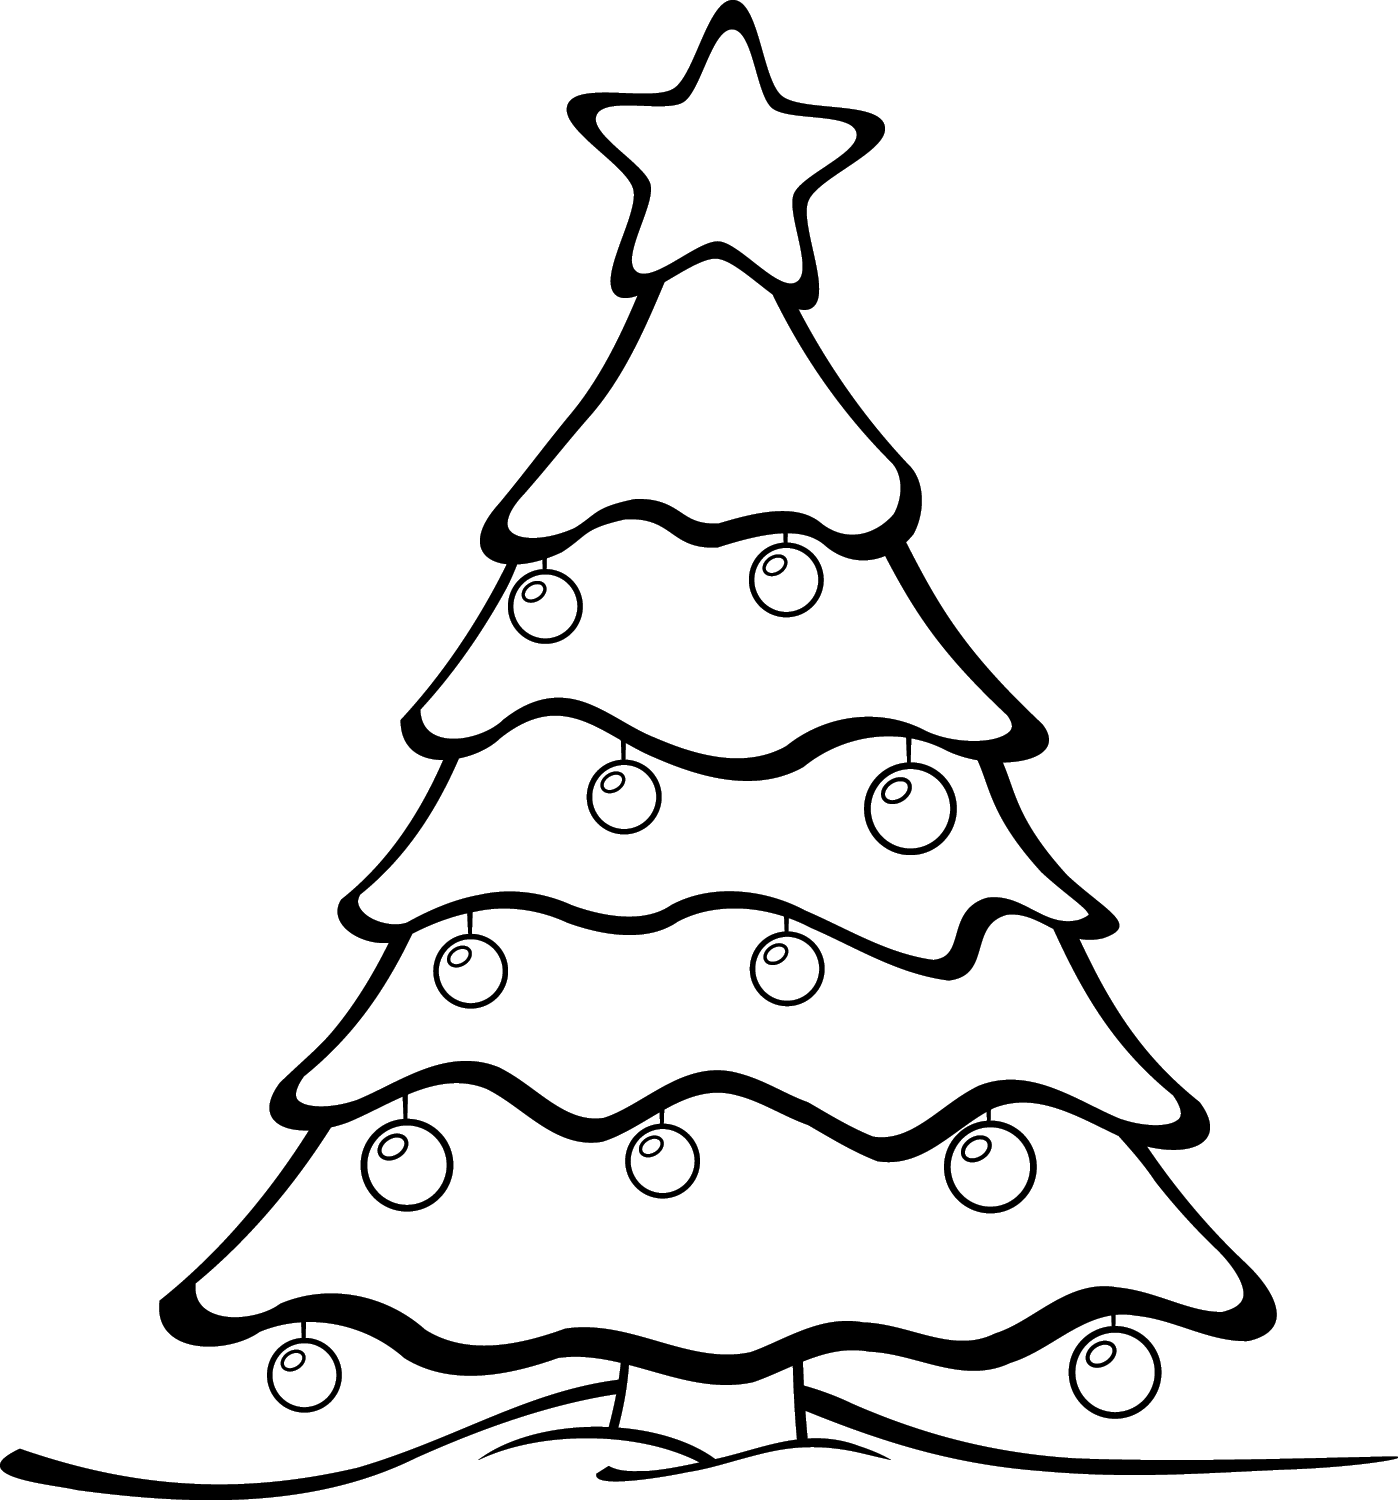 Star Template For Kids - AZ Coloring Pages